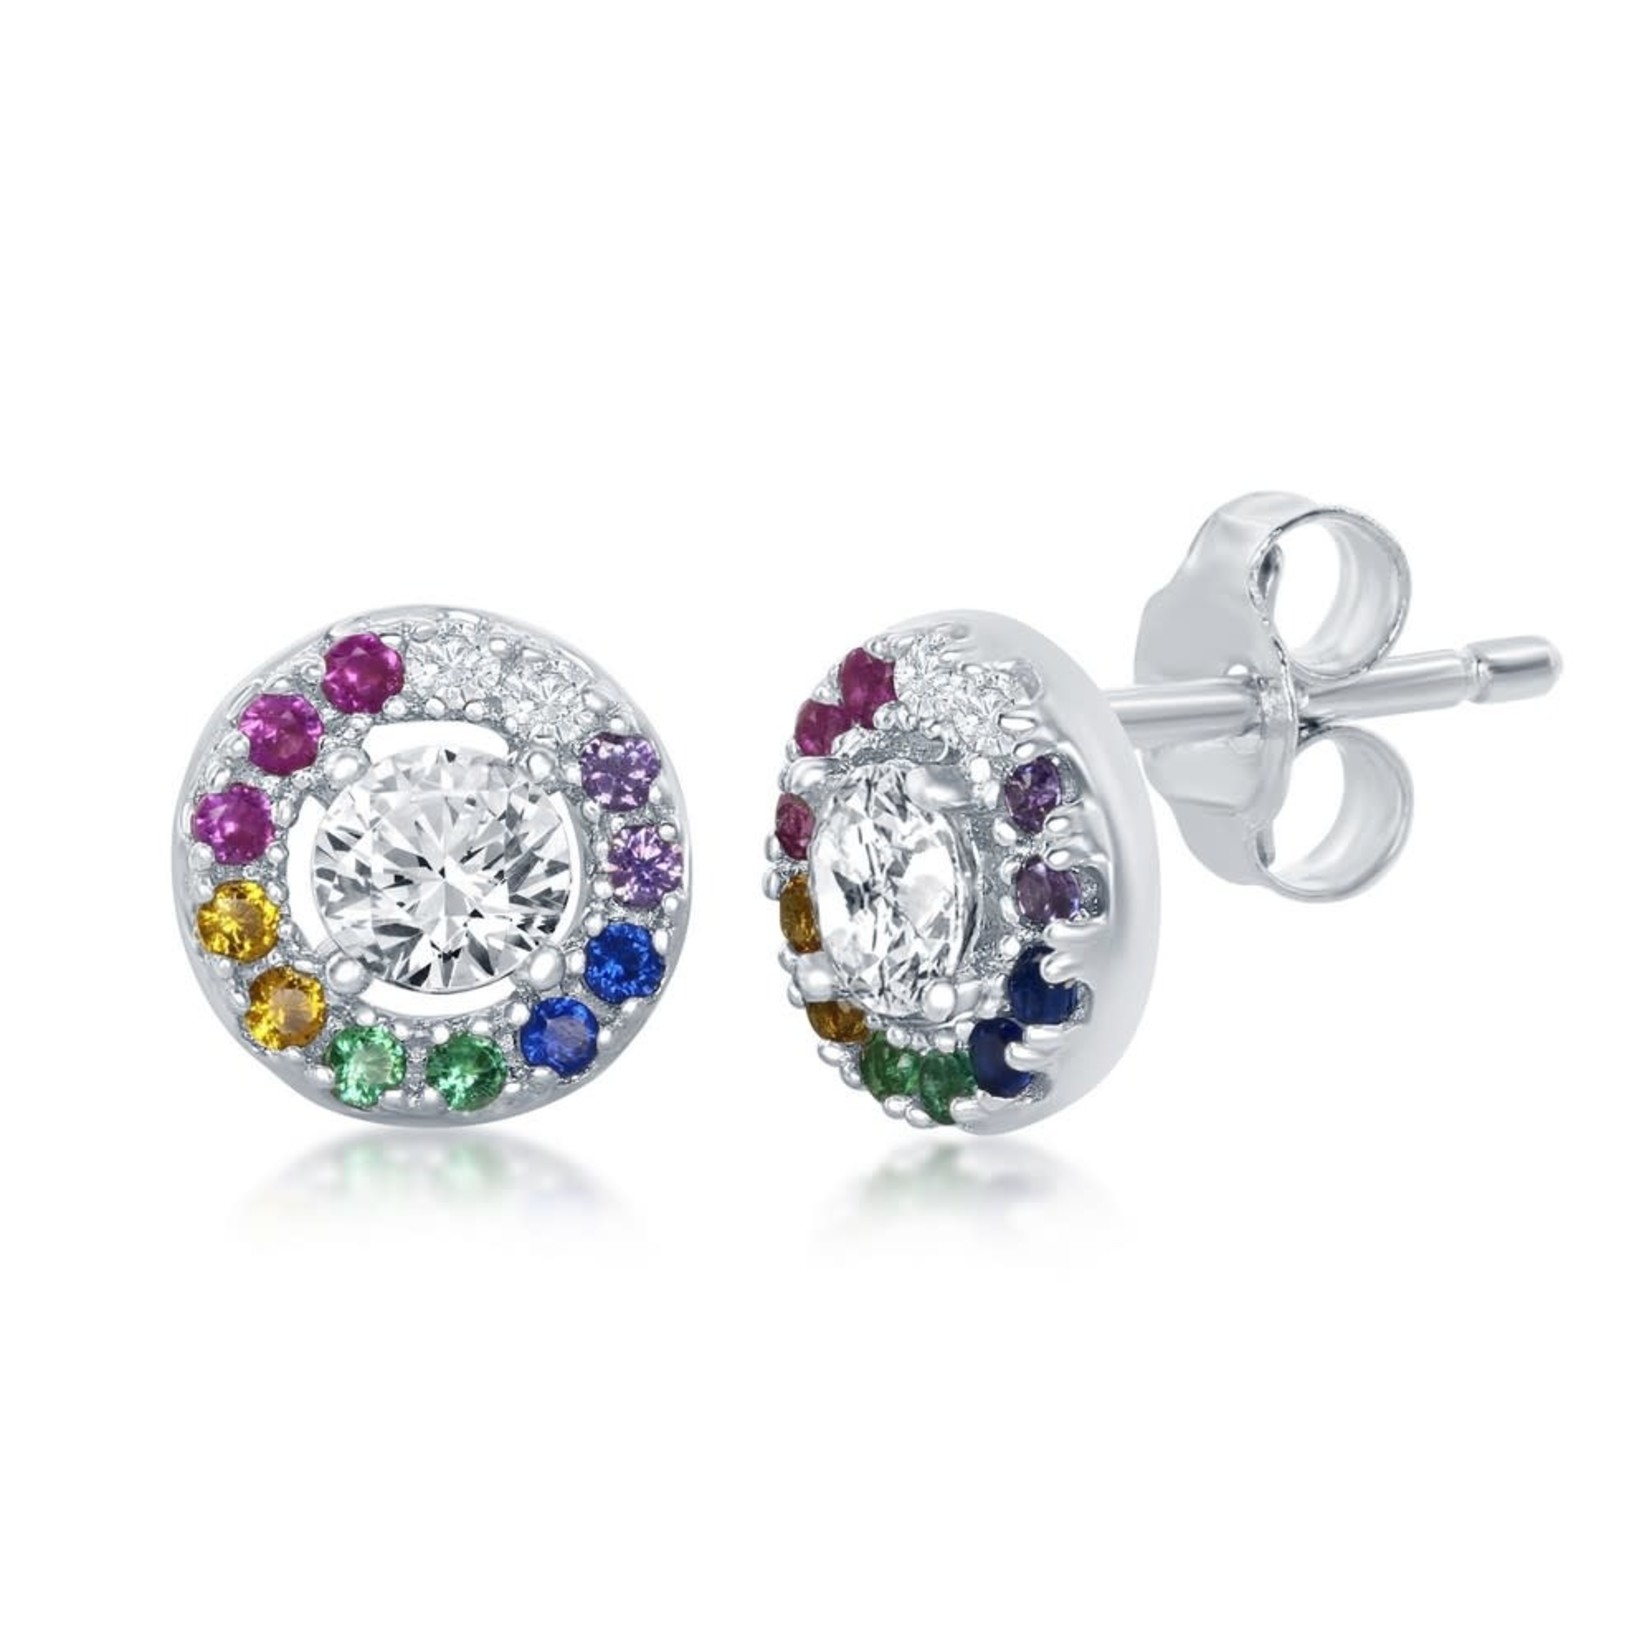 CLASSIC IMPORTS INC Sterling Silver Rainbow & White Cubic Zirconia Earrings